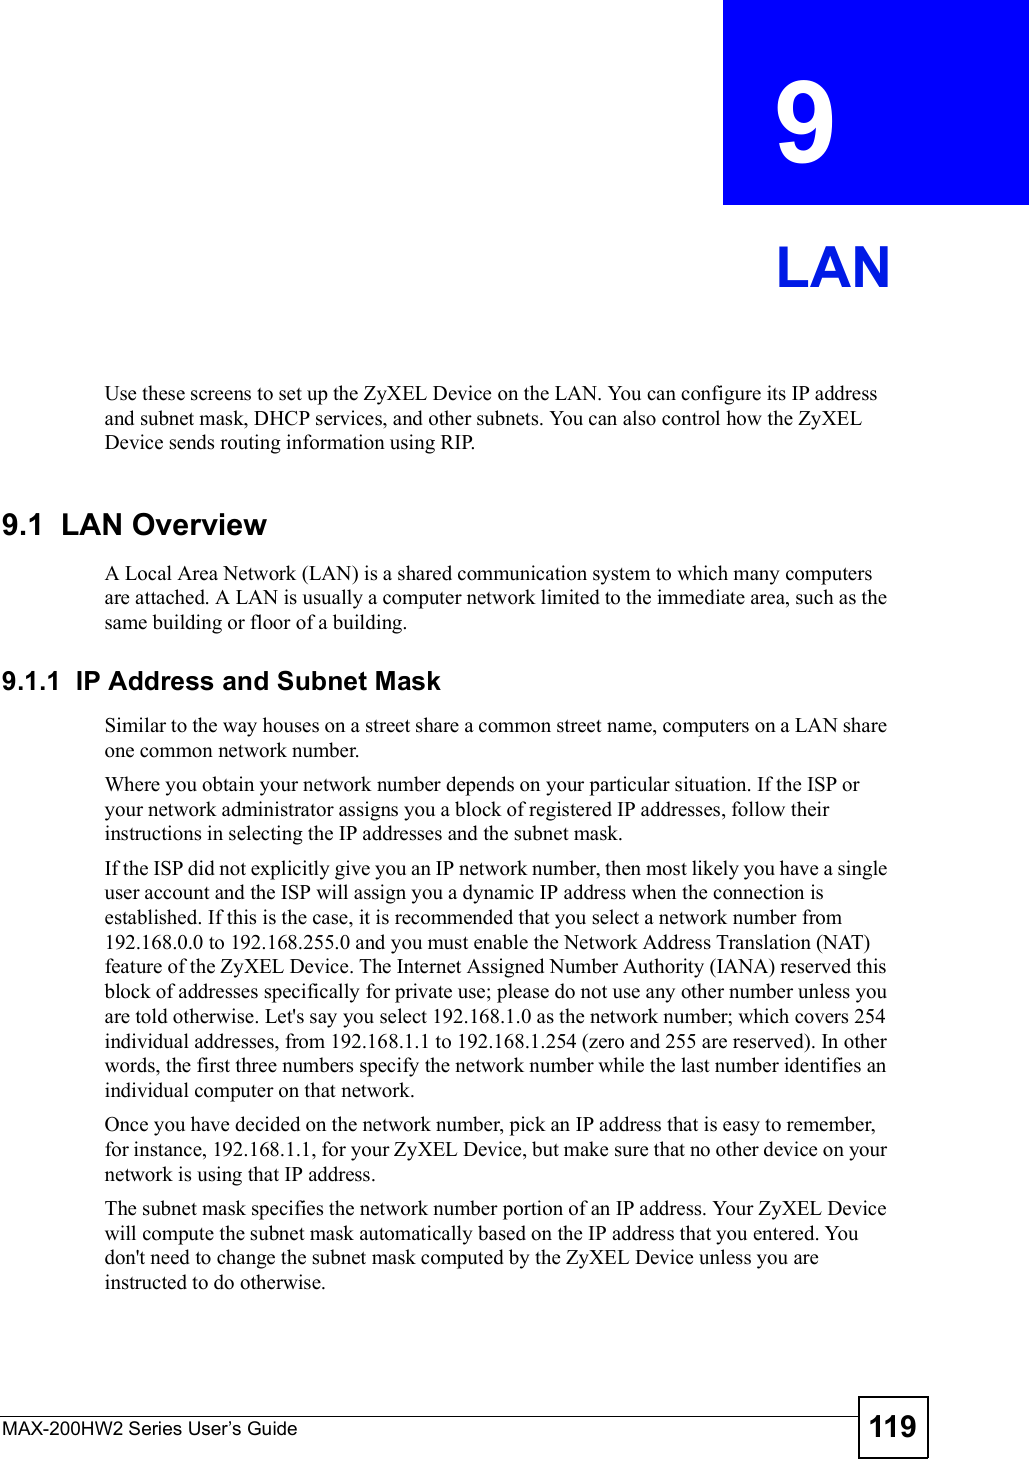 MAX-200HW2 Series User s Guide 119CHAPTER  9 LANUse these screens to set up the ZyXEL Device on the LAN. You can configure its IP address and subnet mask, DHCP services, and other subnets. You can also control how the ZyXEL Device sends routing information using RIP.9.1  LAN OverviewA Local Area Network (LAN) is a shared communication system to which many computers are attached. A LAN is usually a computer network limited to the immediate area, such as the same building or floor of a building.9.1.1  IP Address and Subnet MaskSimilar to the way houses on a street share a common street name, computers on a LAN share one common network number.Where you obtain your network number depends on your particular situation. If the ISP or your network administrator assigns you a block of registered IP addresses, follow their instructions in selecting the IP addresses and the subnet mask.If the ISP did not explicitly give you an IP network number, then most likely you have a single user account and the ISP will assign you a dynamic IP address when the connection is established. If this is the case, it is recommended that you select a network number from 192.168.0.0 to 192.168.255.0 and you must enable the Network Address Translation (NAT) feature of the ZyXEL Device. The Internet Assigned Number Authority (IANA) reserved this block of addresses specifically for private use; please do not use any other number unless you are told otherwise. Let&apos;s say you select 192.168.1.0 as the network number; which covers 254 individual addresses, from 192.168.1.1 to 192.168.1.254 (zero and 255 are reserved). In other words, the first three numbers specify the network number while the last number identifies an individual computer on that network.Once you have decided on the network number, pick an IP address that is easy to remember, for instance, 192.168.1.1, for your ZyXEL Device, but make sure that no other device on your network is using that IP address.The subnet mask specifies the network number portion of an IP address. Your ZyXEL Device will compute the subnet mask automatically based on the IP address that you entered. You don&apos;t need to change the subnet mask computed by the ZyXEL Device unless you are instructed to do otherwise.